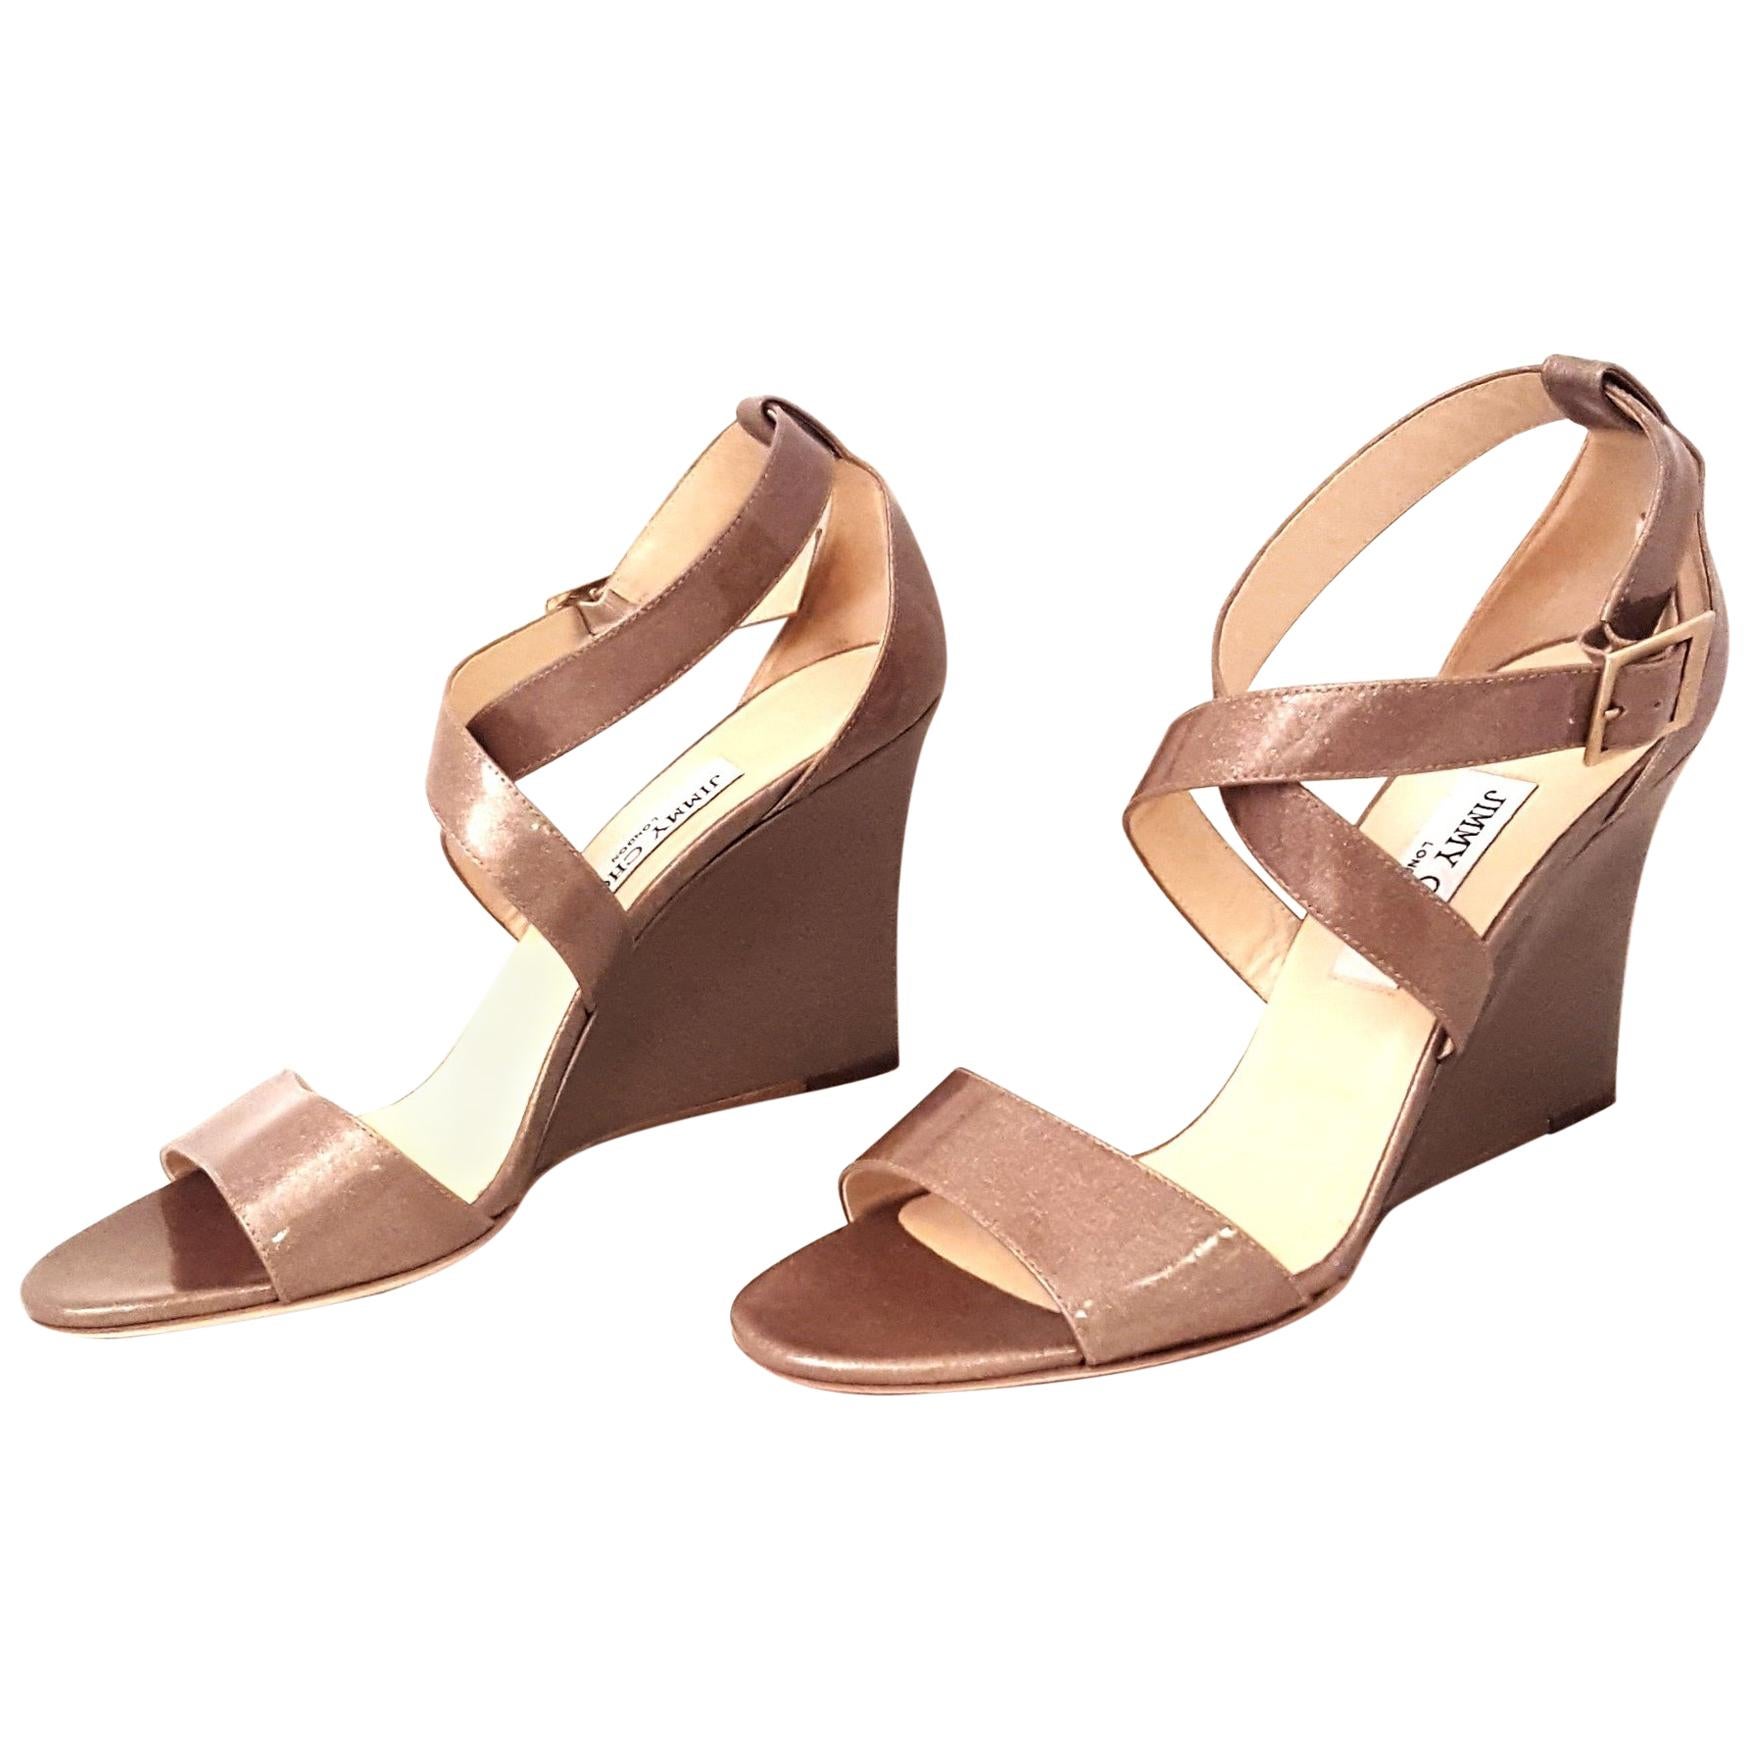 Jimmy Choo Fearne Taupe Patent Leather Glitter & Criss Cross Straps Wedges